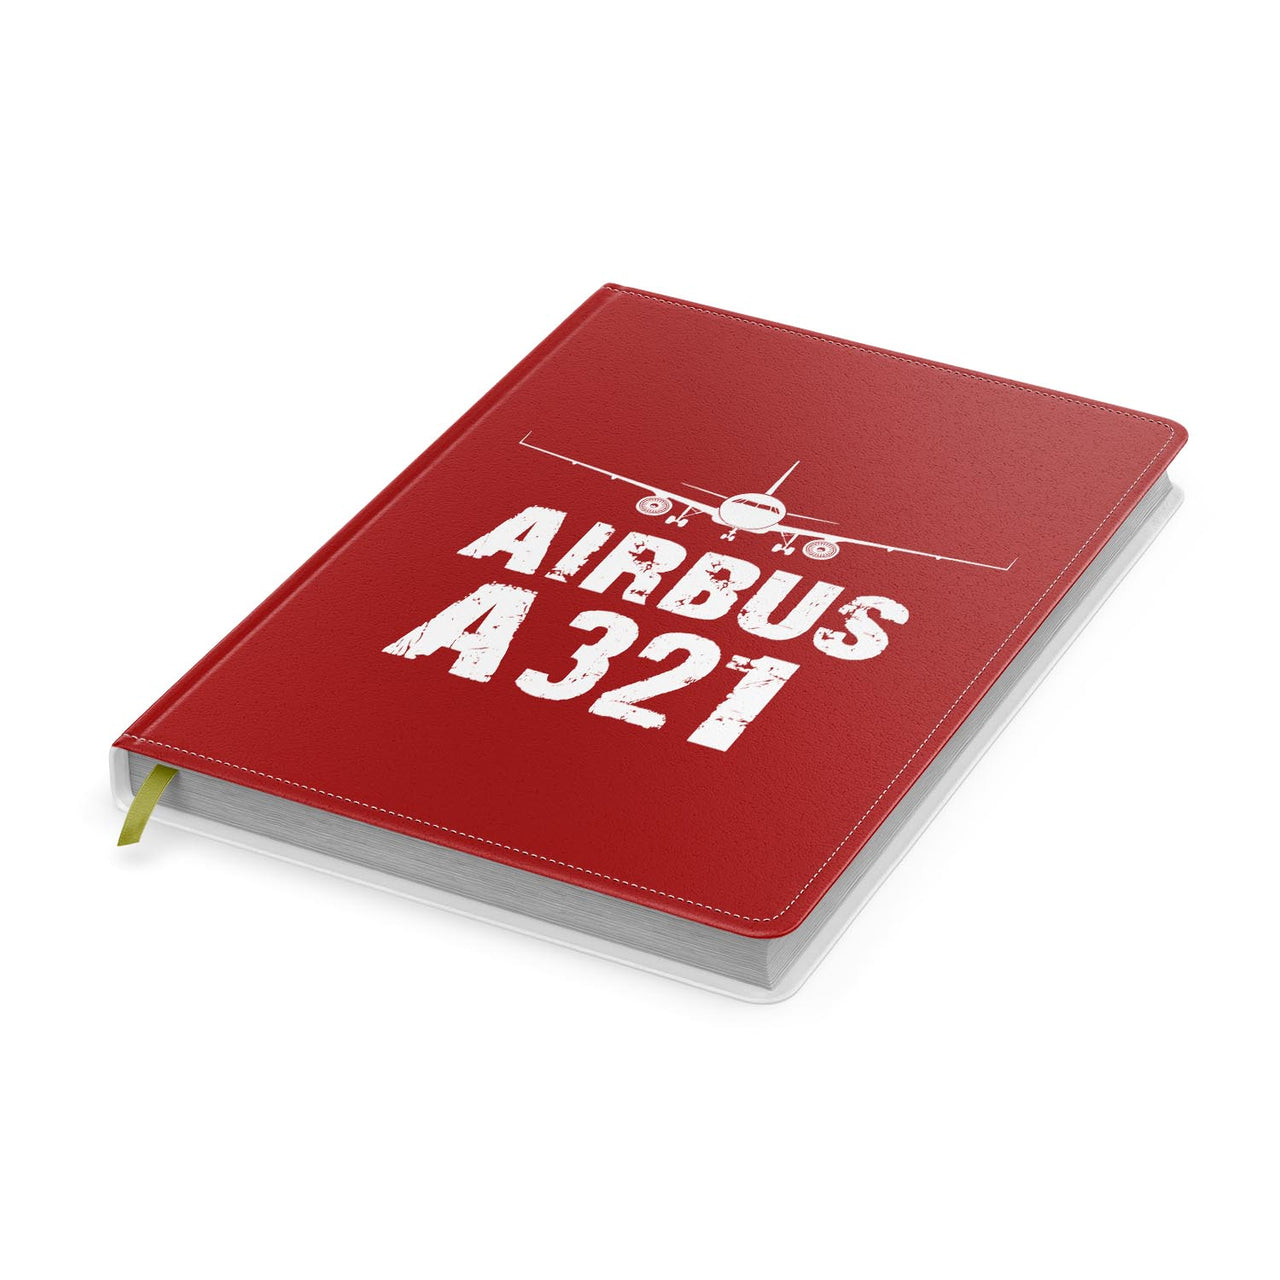 Airbus A321 & Plane Designed Notebooks